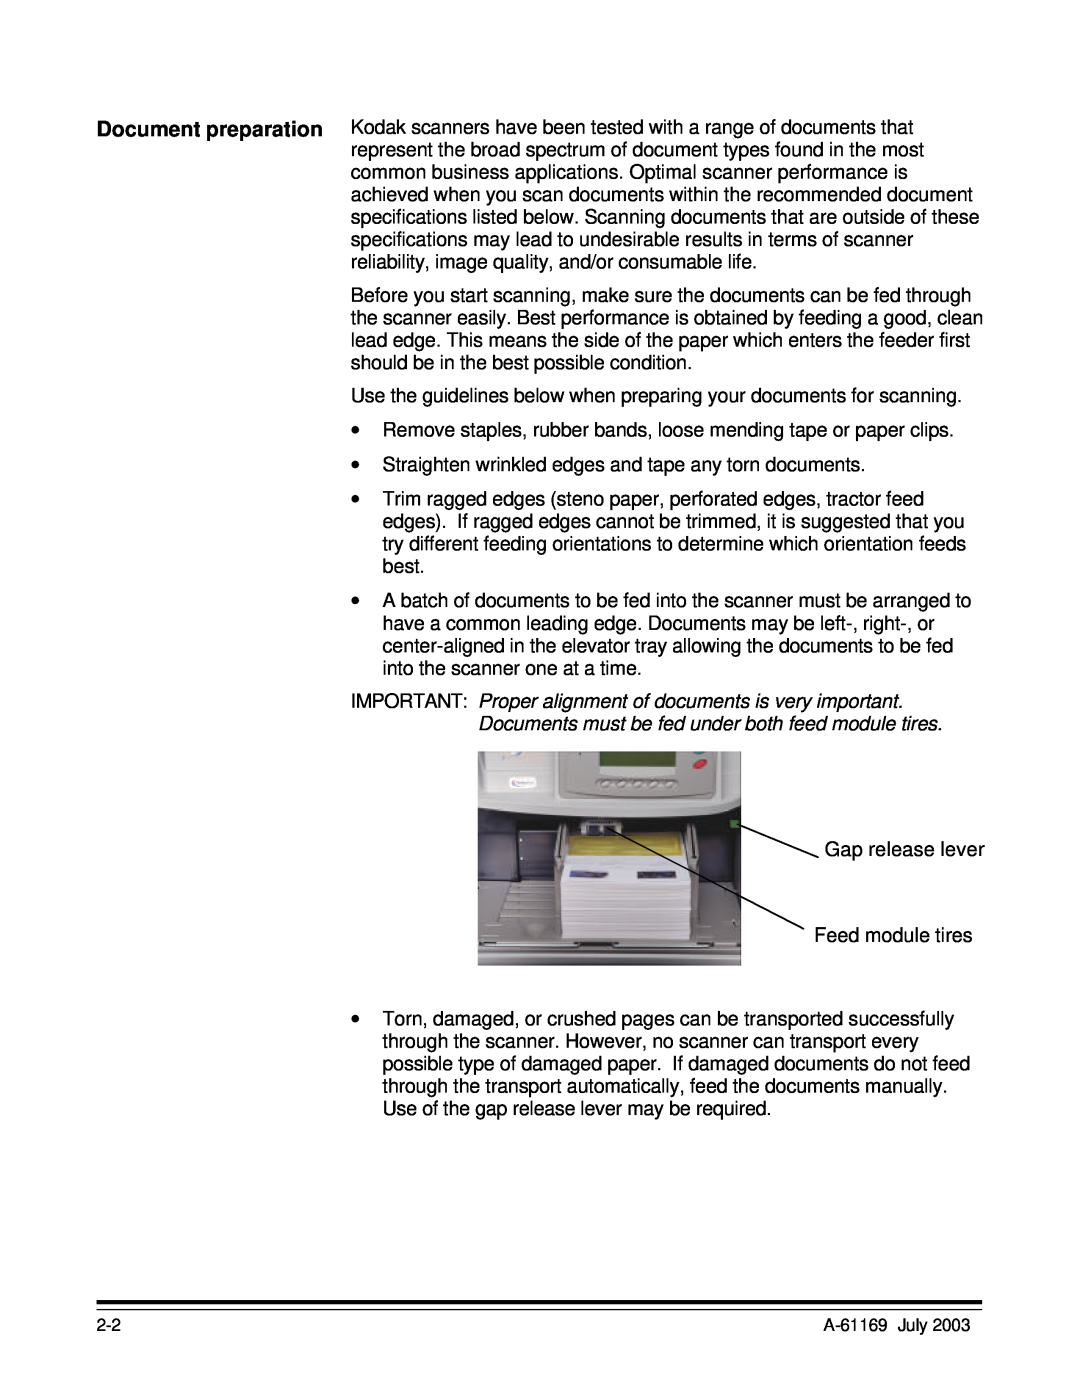 Kodak i800 Series manual IMPORTANT Proper alignment of documents is very important 